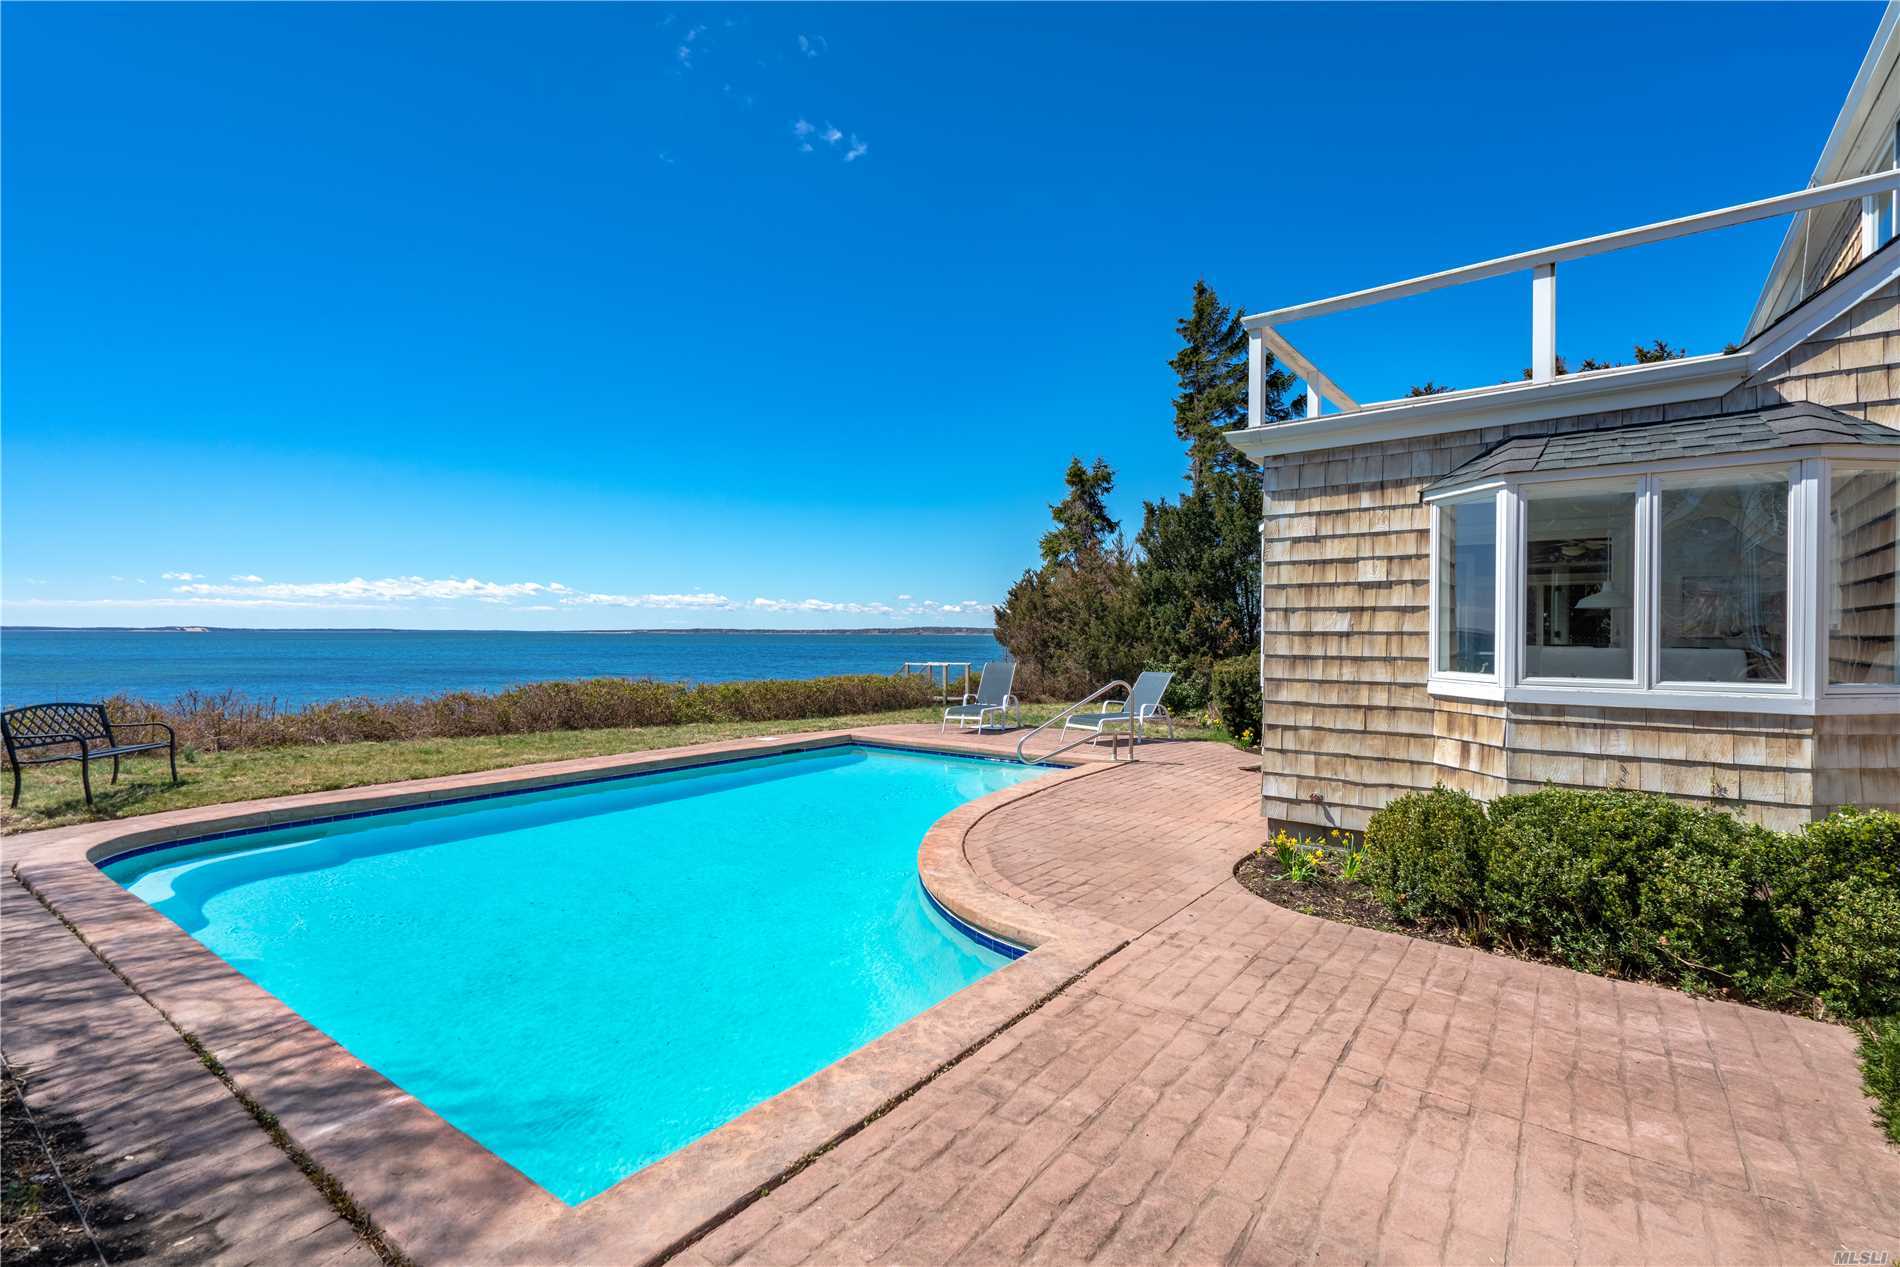 Dreamy 1930&rsquo;s cape on Peconic Bay with stunning views from Jessup&rsquo;s Neck to Nassau Point. The water side pool, privacy, charm, 4 bedrooms, 2 full baths, detached garage, full basement and all updated mechanicals makes this property the complete package for any serious bay front buyer. Fully bulk headed low bluff stairs lead to 100 feet of private sandy beach and shared dock in community docking area. Bay front beauty.